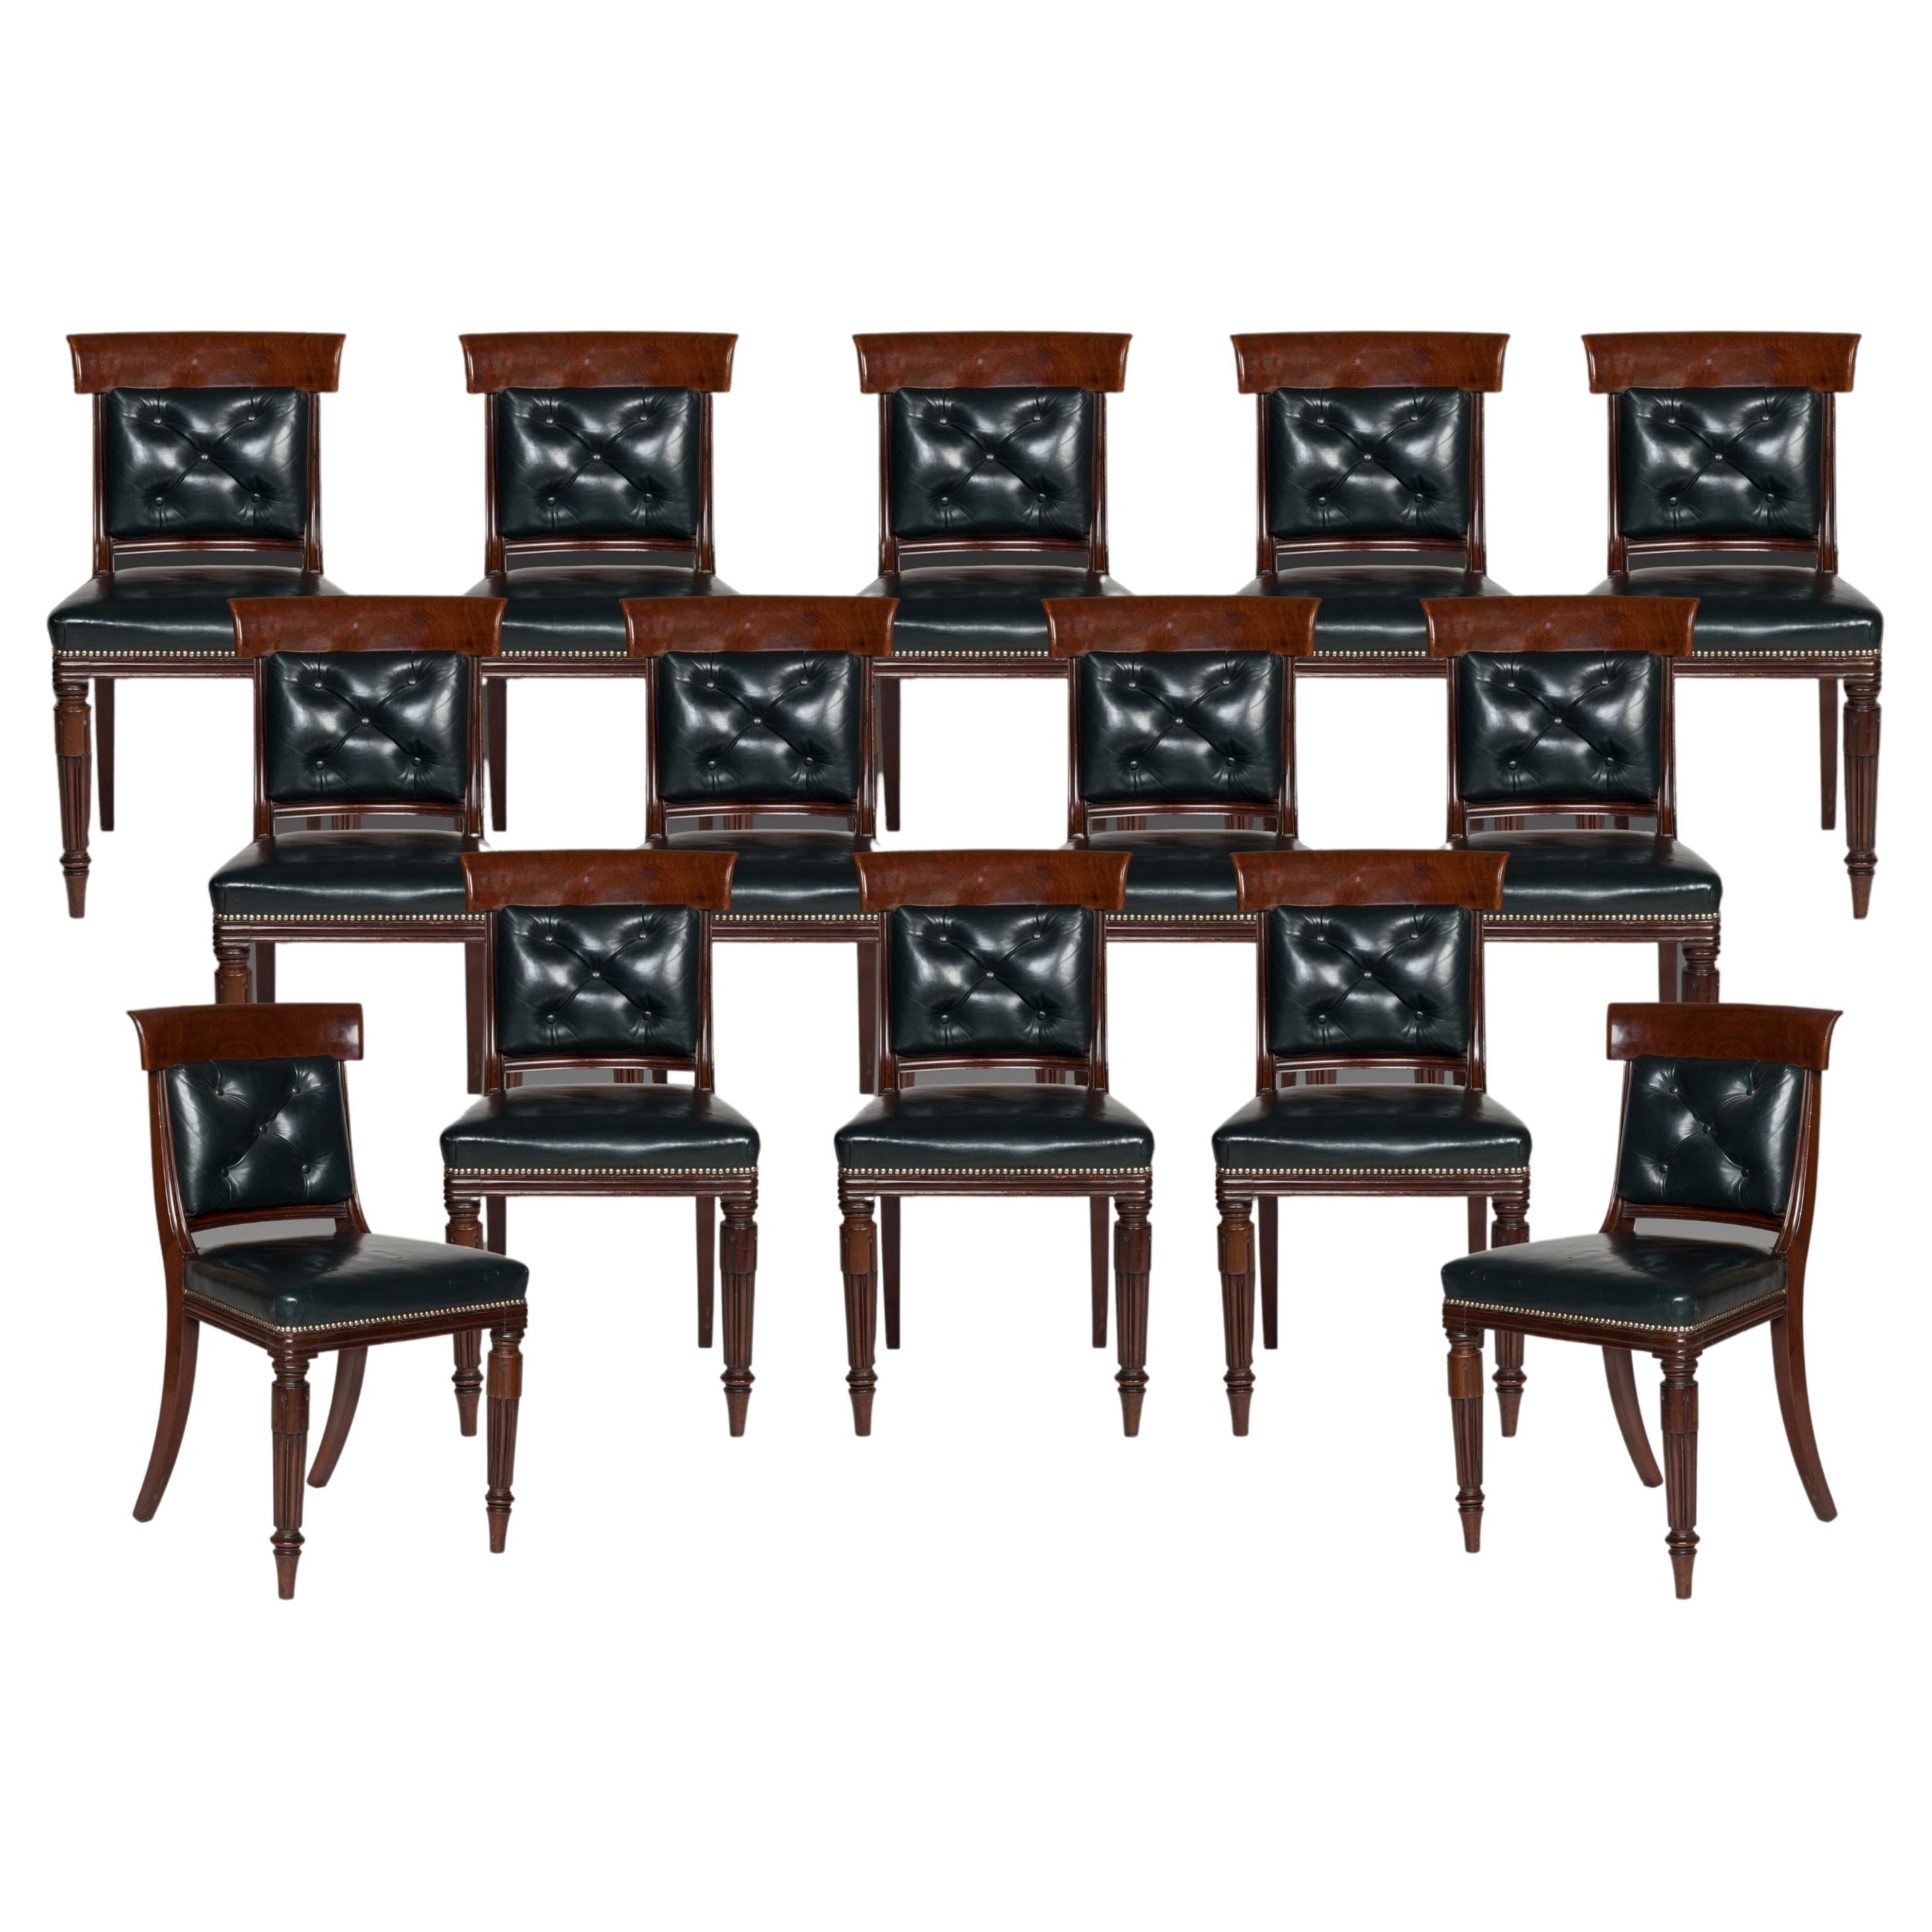 Rare Set of 14 William IV Period Dining Chairs with Great Provenance For Sale